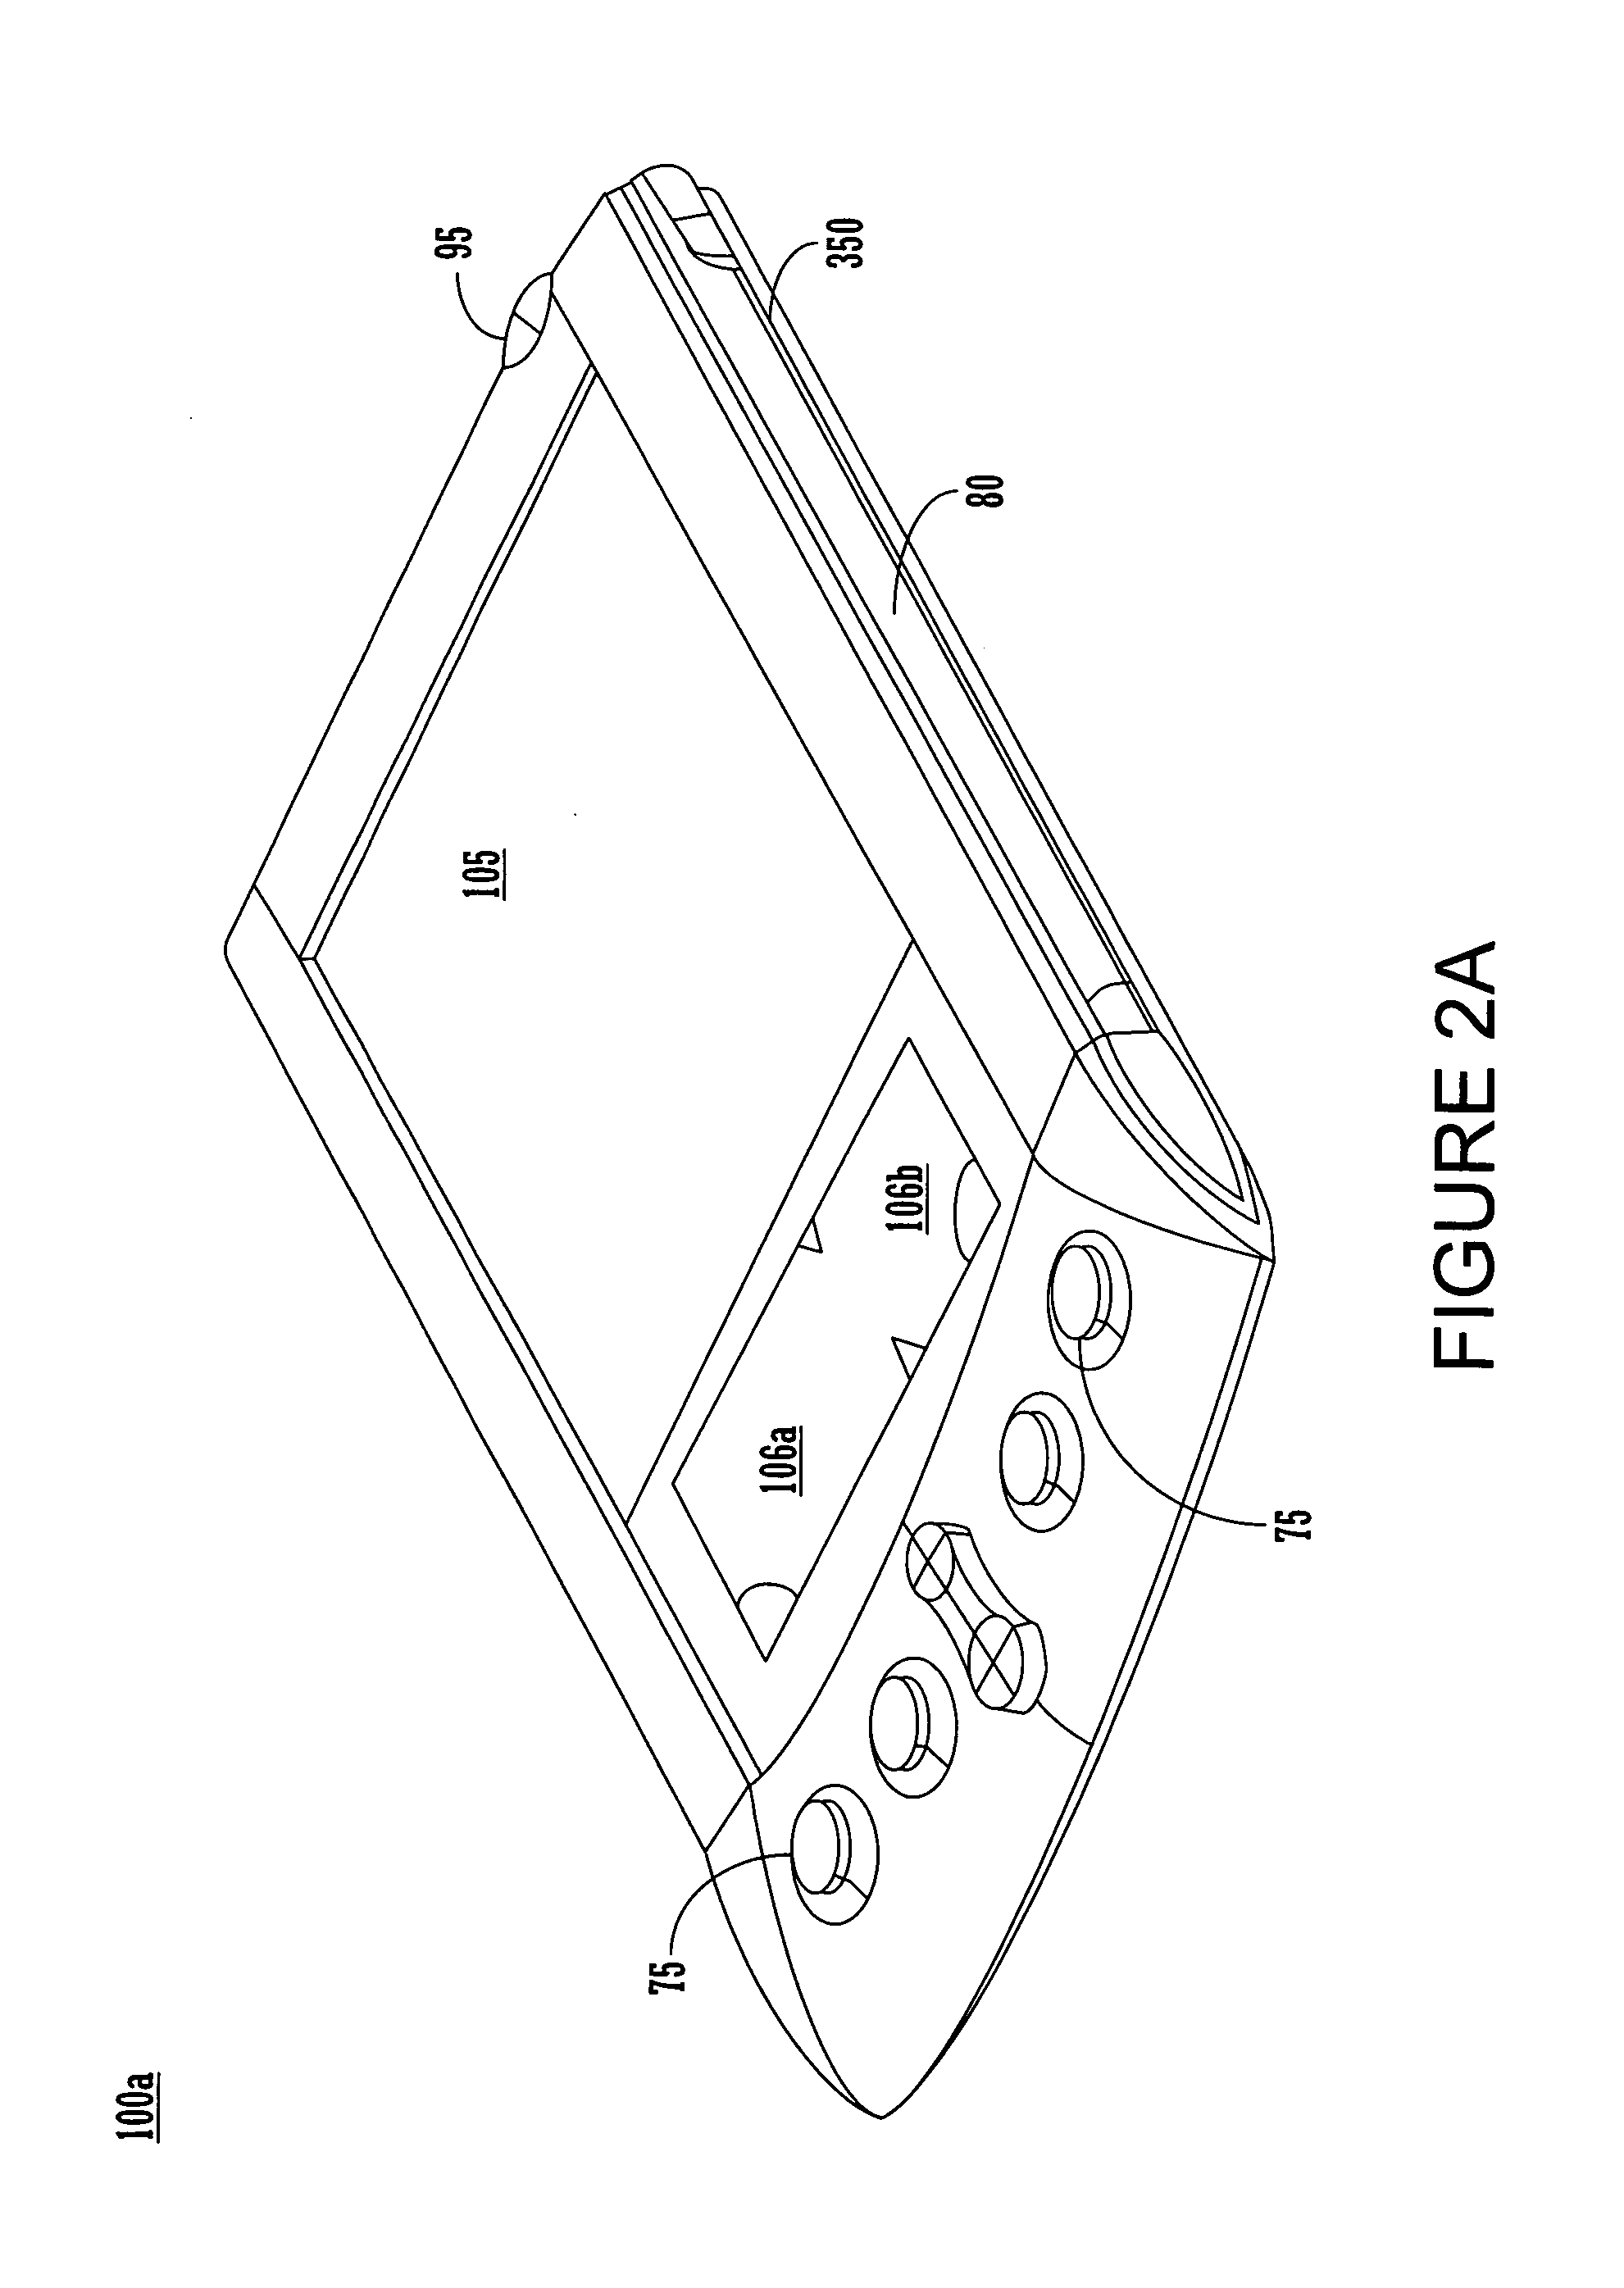 Method and apparatus for automatic power-up and power-down of a computer system based on the positions of an associated stylus and/or hinge